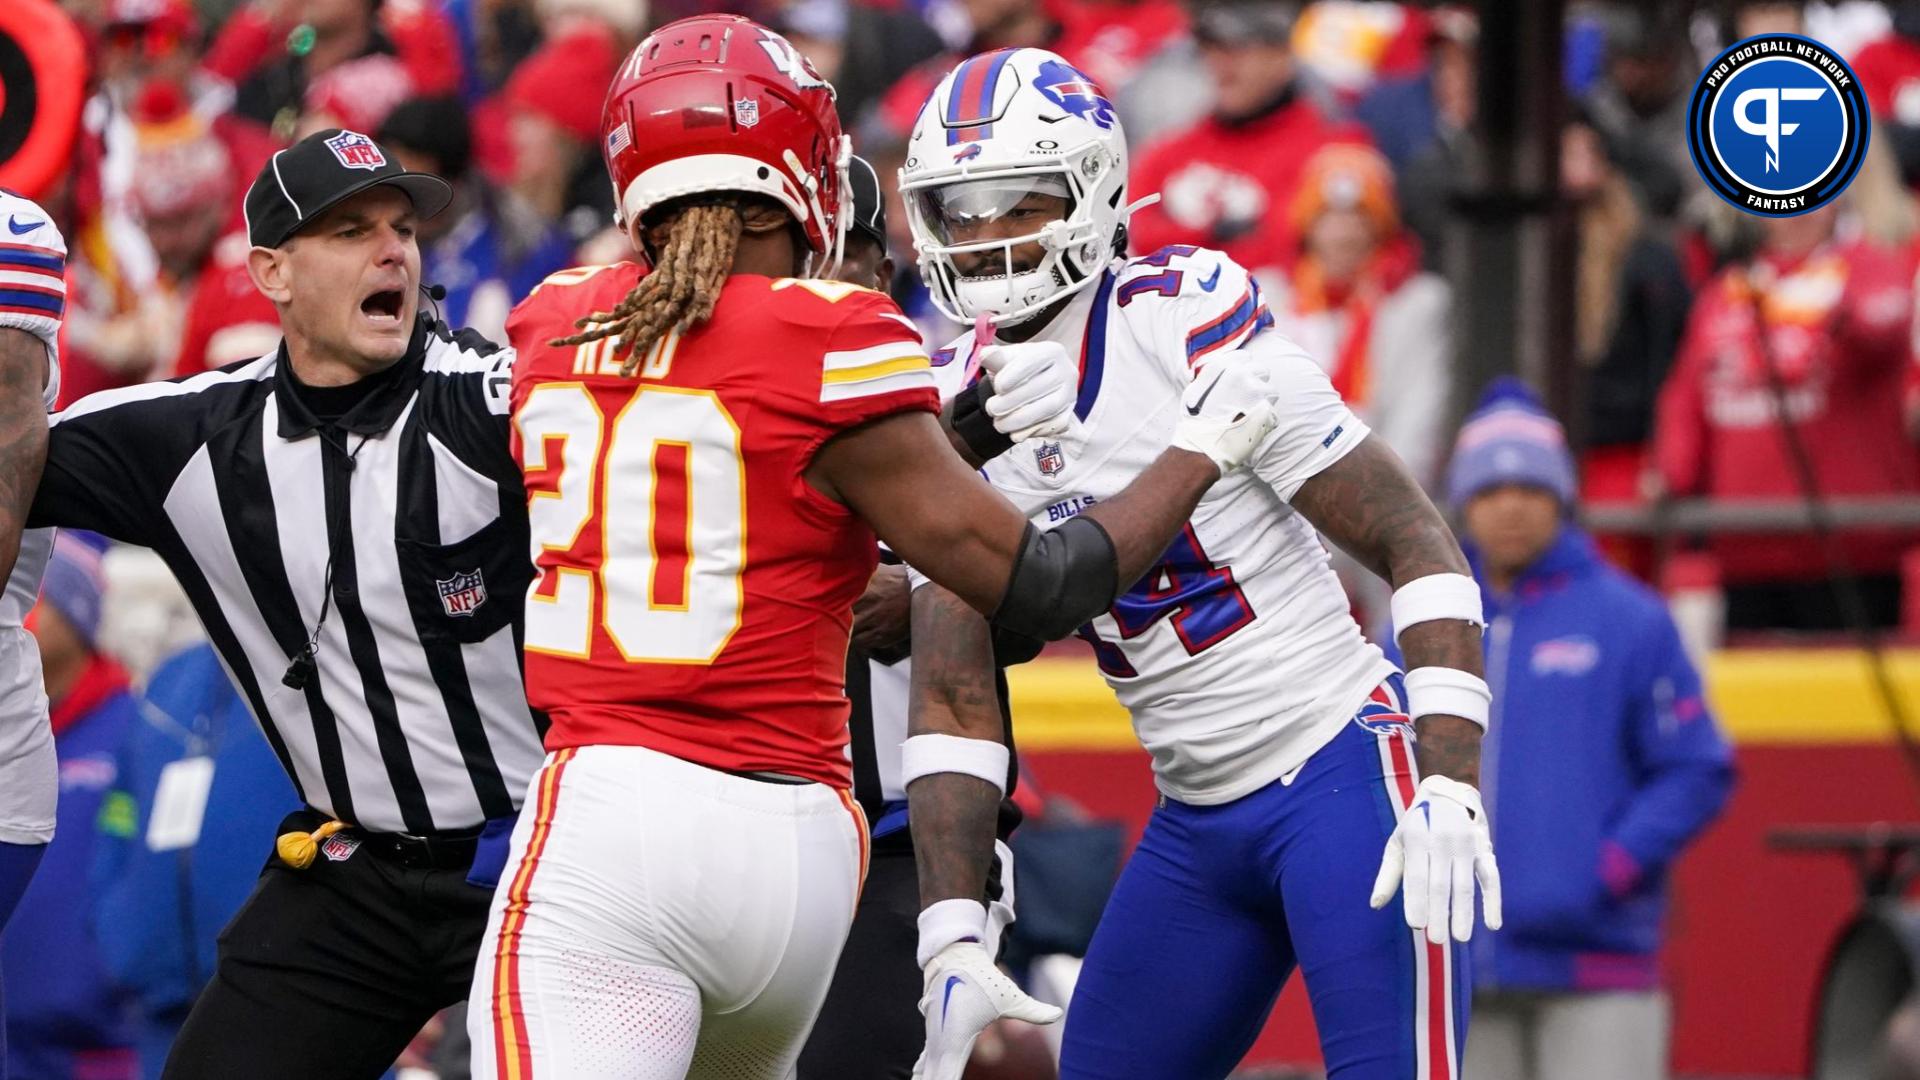 Kansas City Chiefs safety Justin Reid (20) and Buffalo Bills wide receiver Stefon Diggs (14) scuffle after a play during the first half at GEHA Field at Arrowhead Stadium.